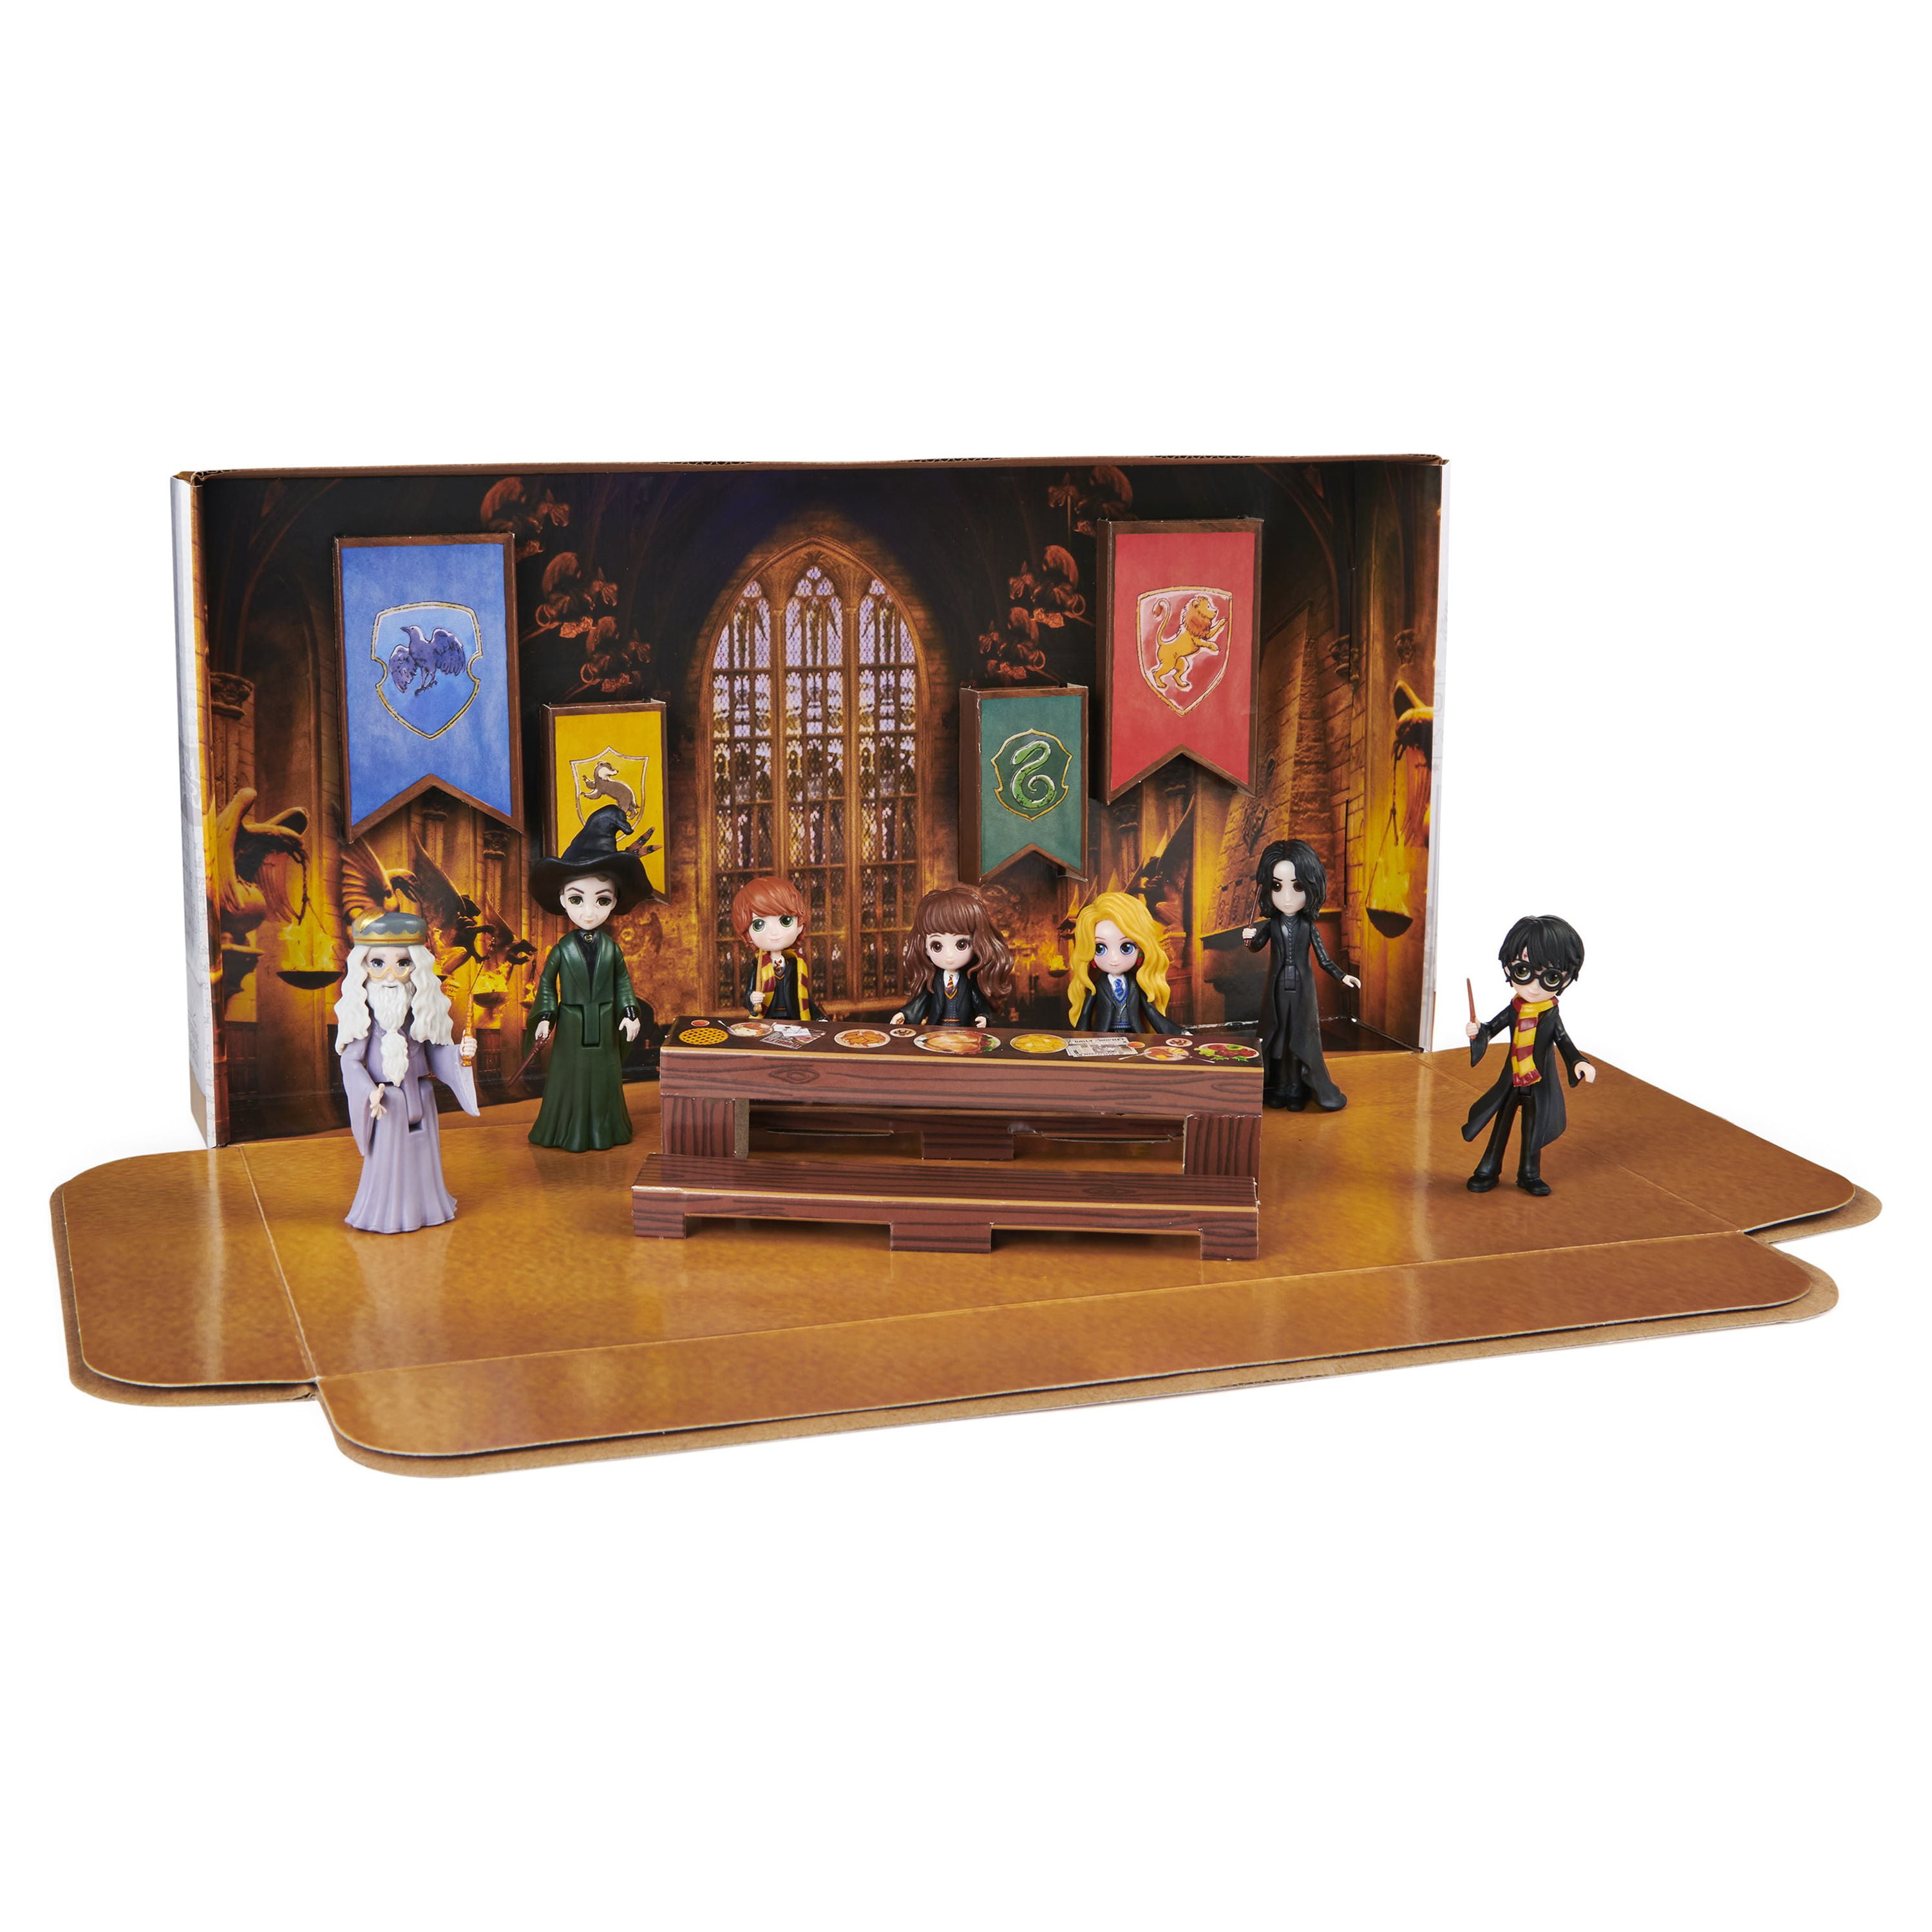 Harry Potter Magical Minis Play Set for Kids - Bundle with Harry Potter  Figure and Accessories Plus Harry Potter Decal and Magic Kit | Harry Potter